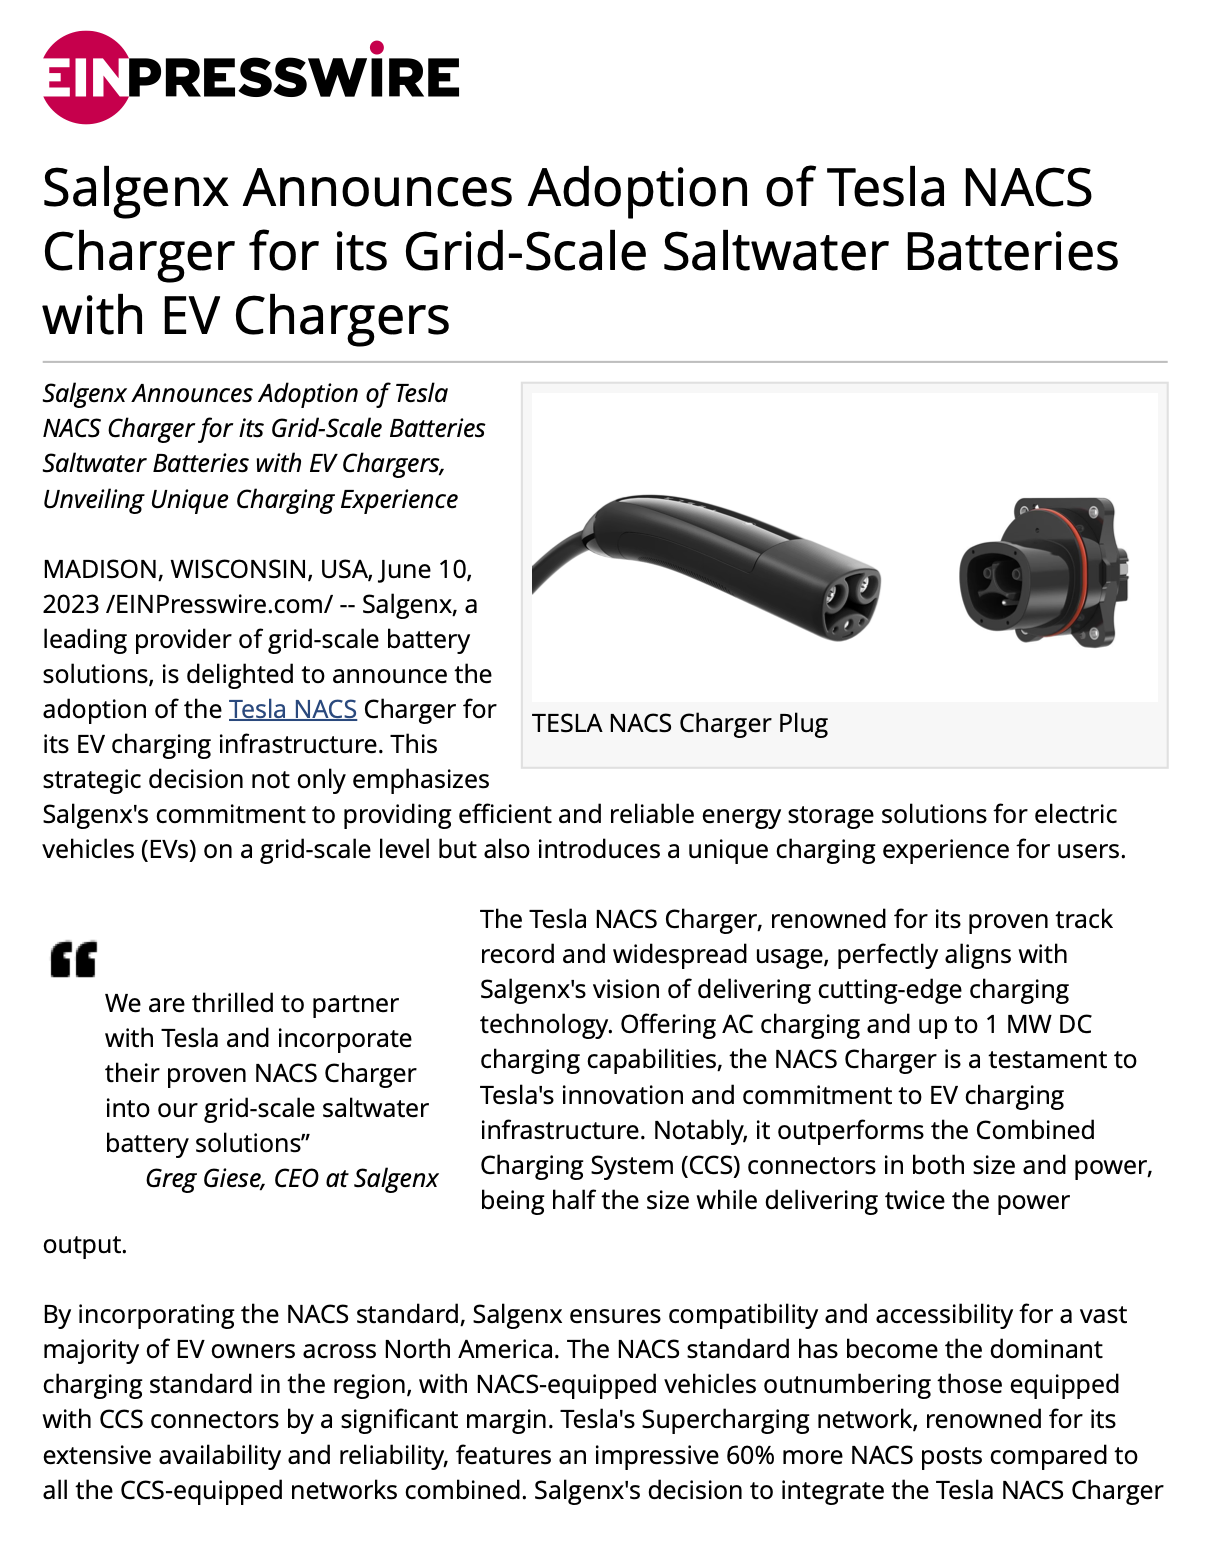 Salgenx Announces Adoption of Tesla NACS
Charger for its Grid-Scale Saltwater Batteries with EV Chargers